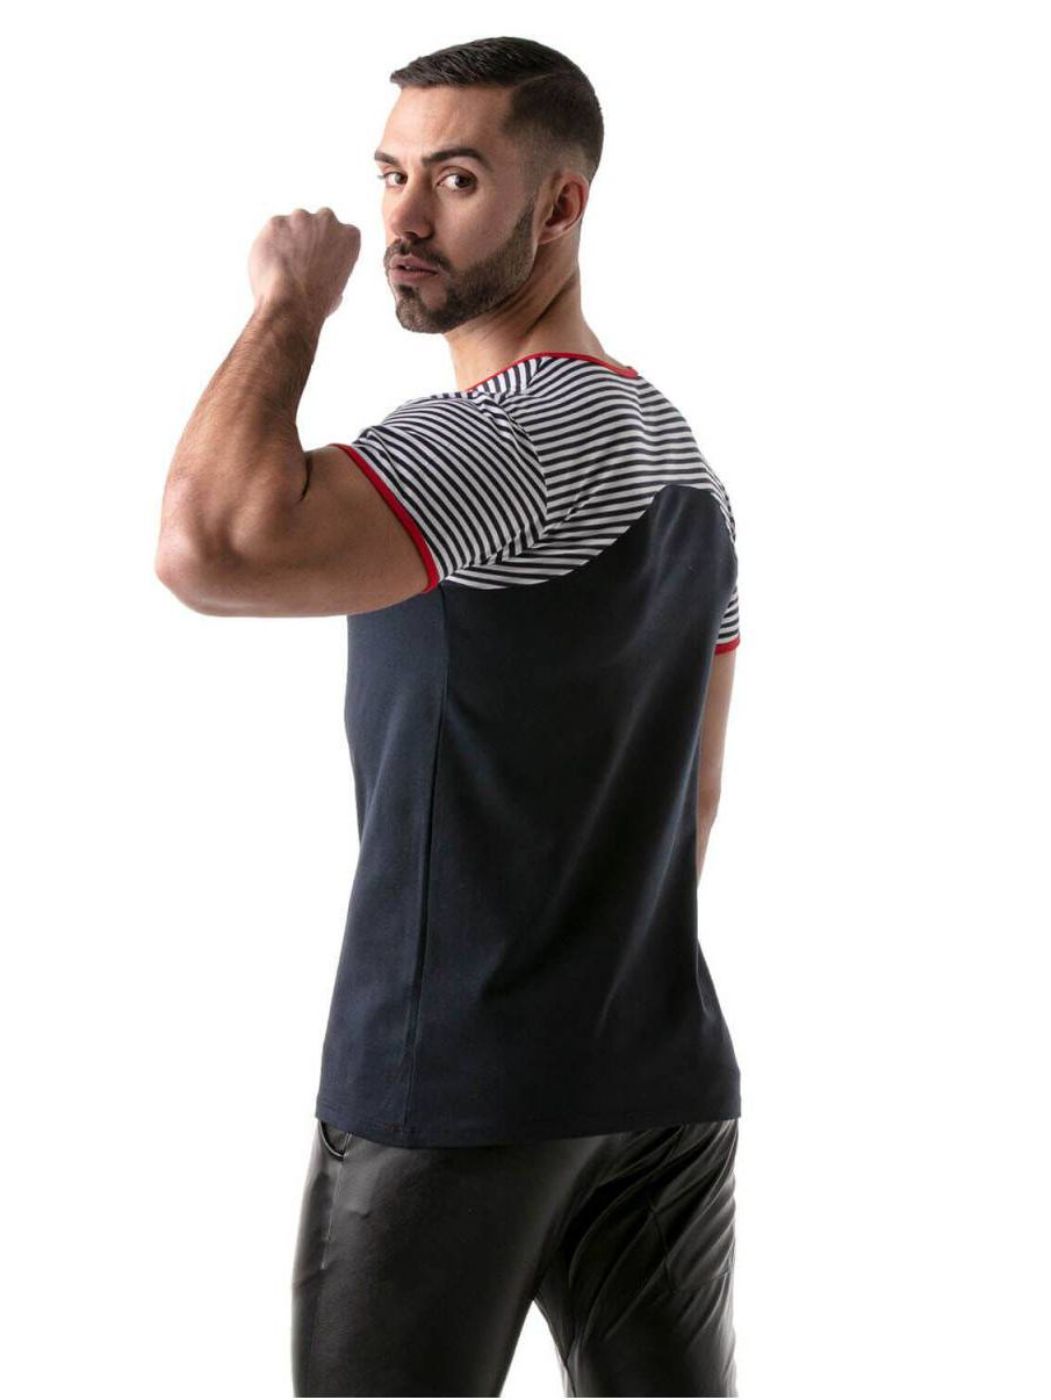 TOF T-Shirt Navy Stripes | Red